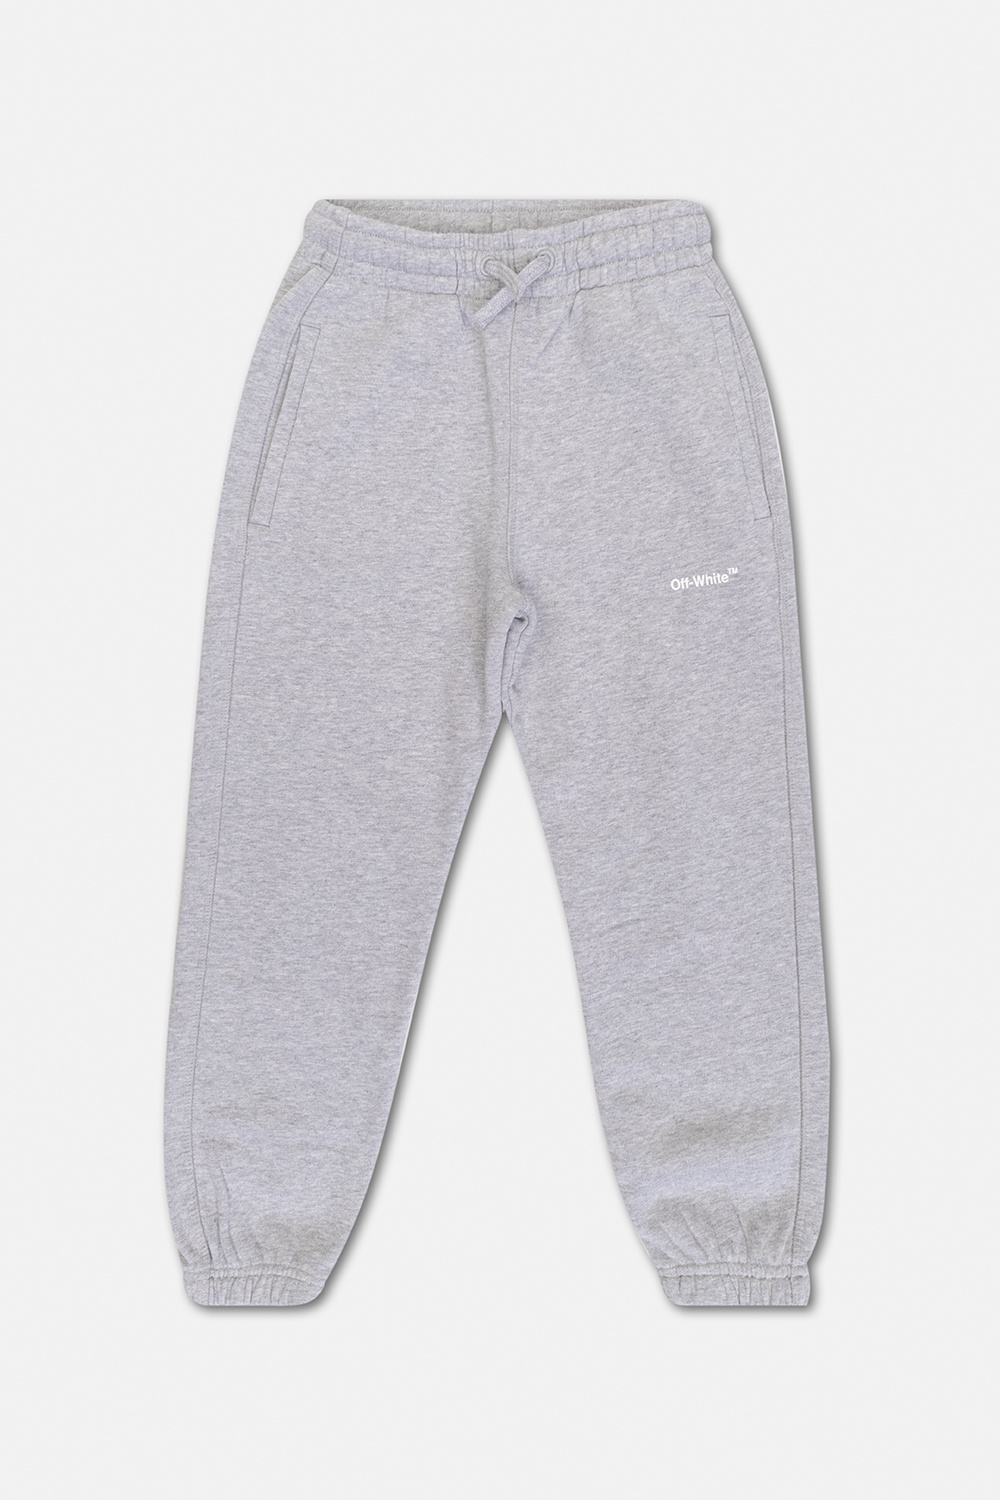 Off-White Kids Sweatpants with logo